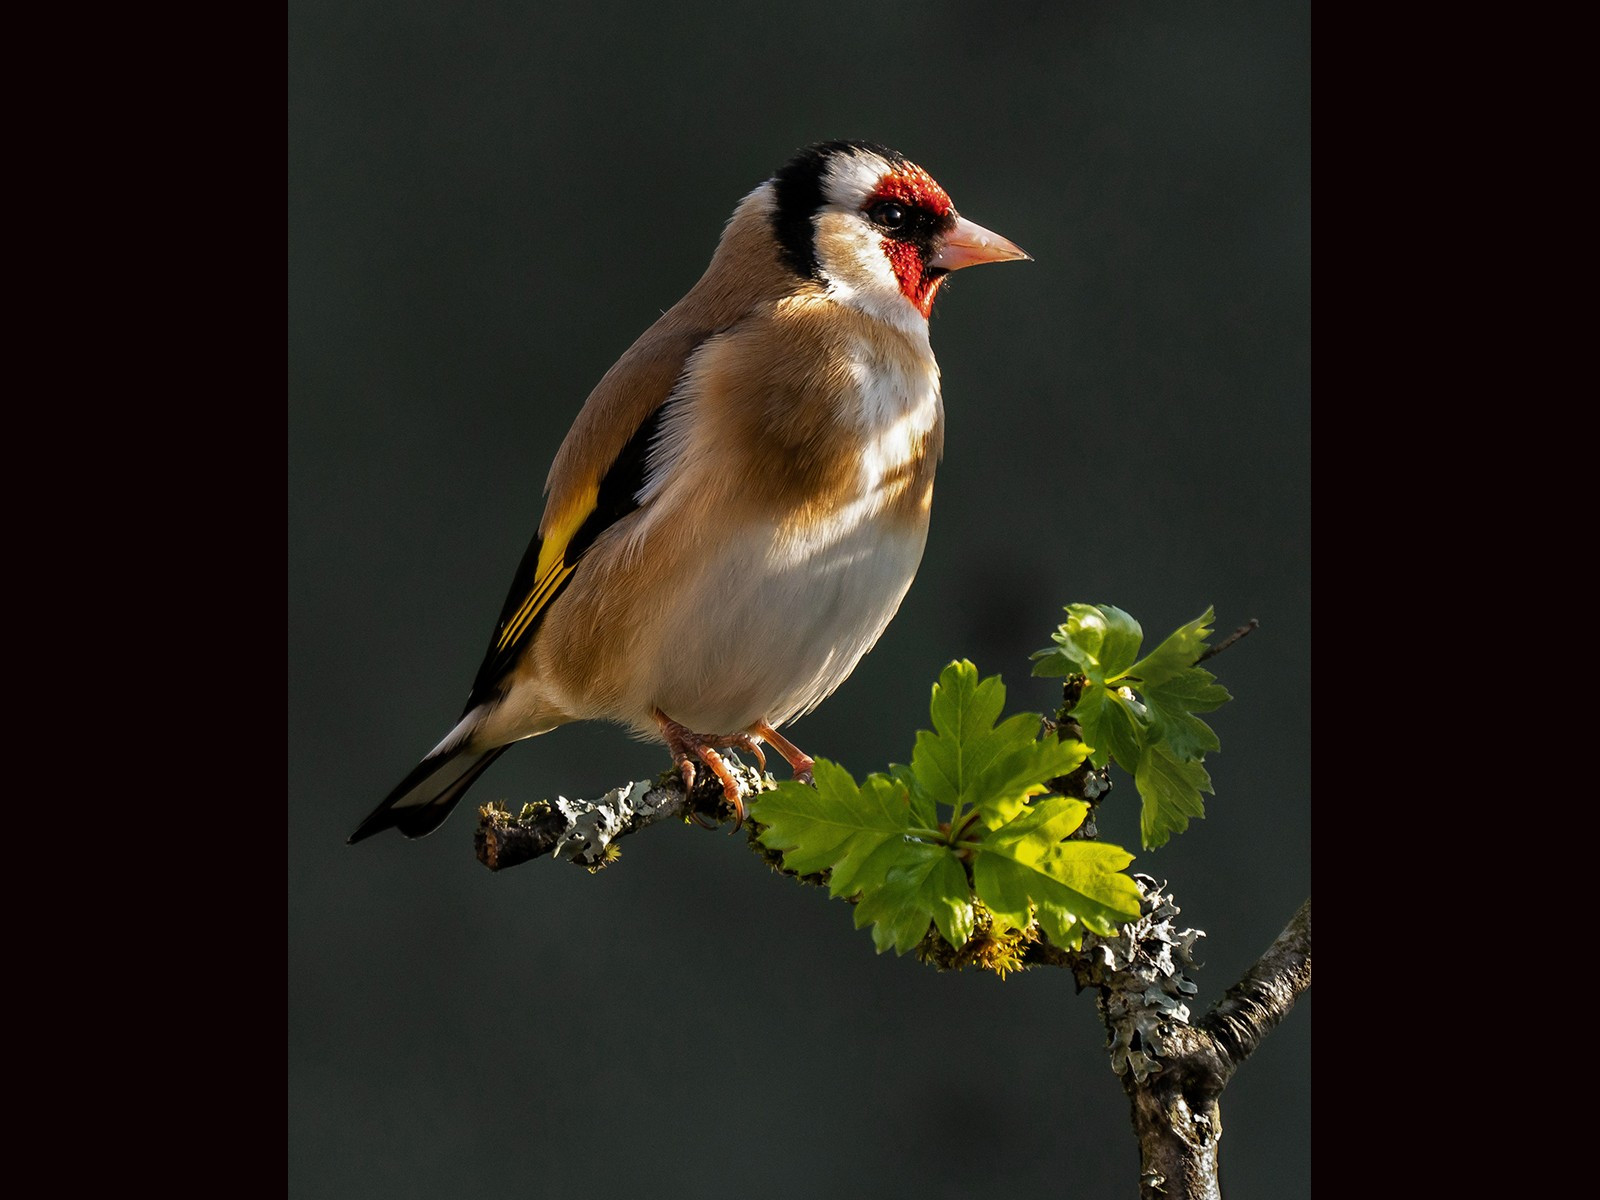 6.Early light on goldfinch.